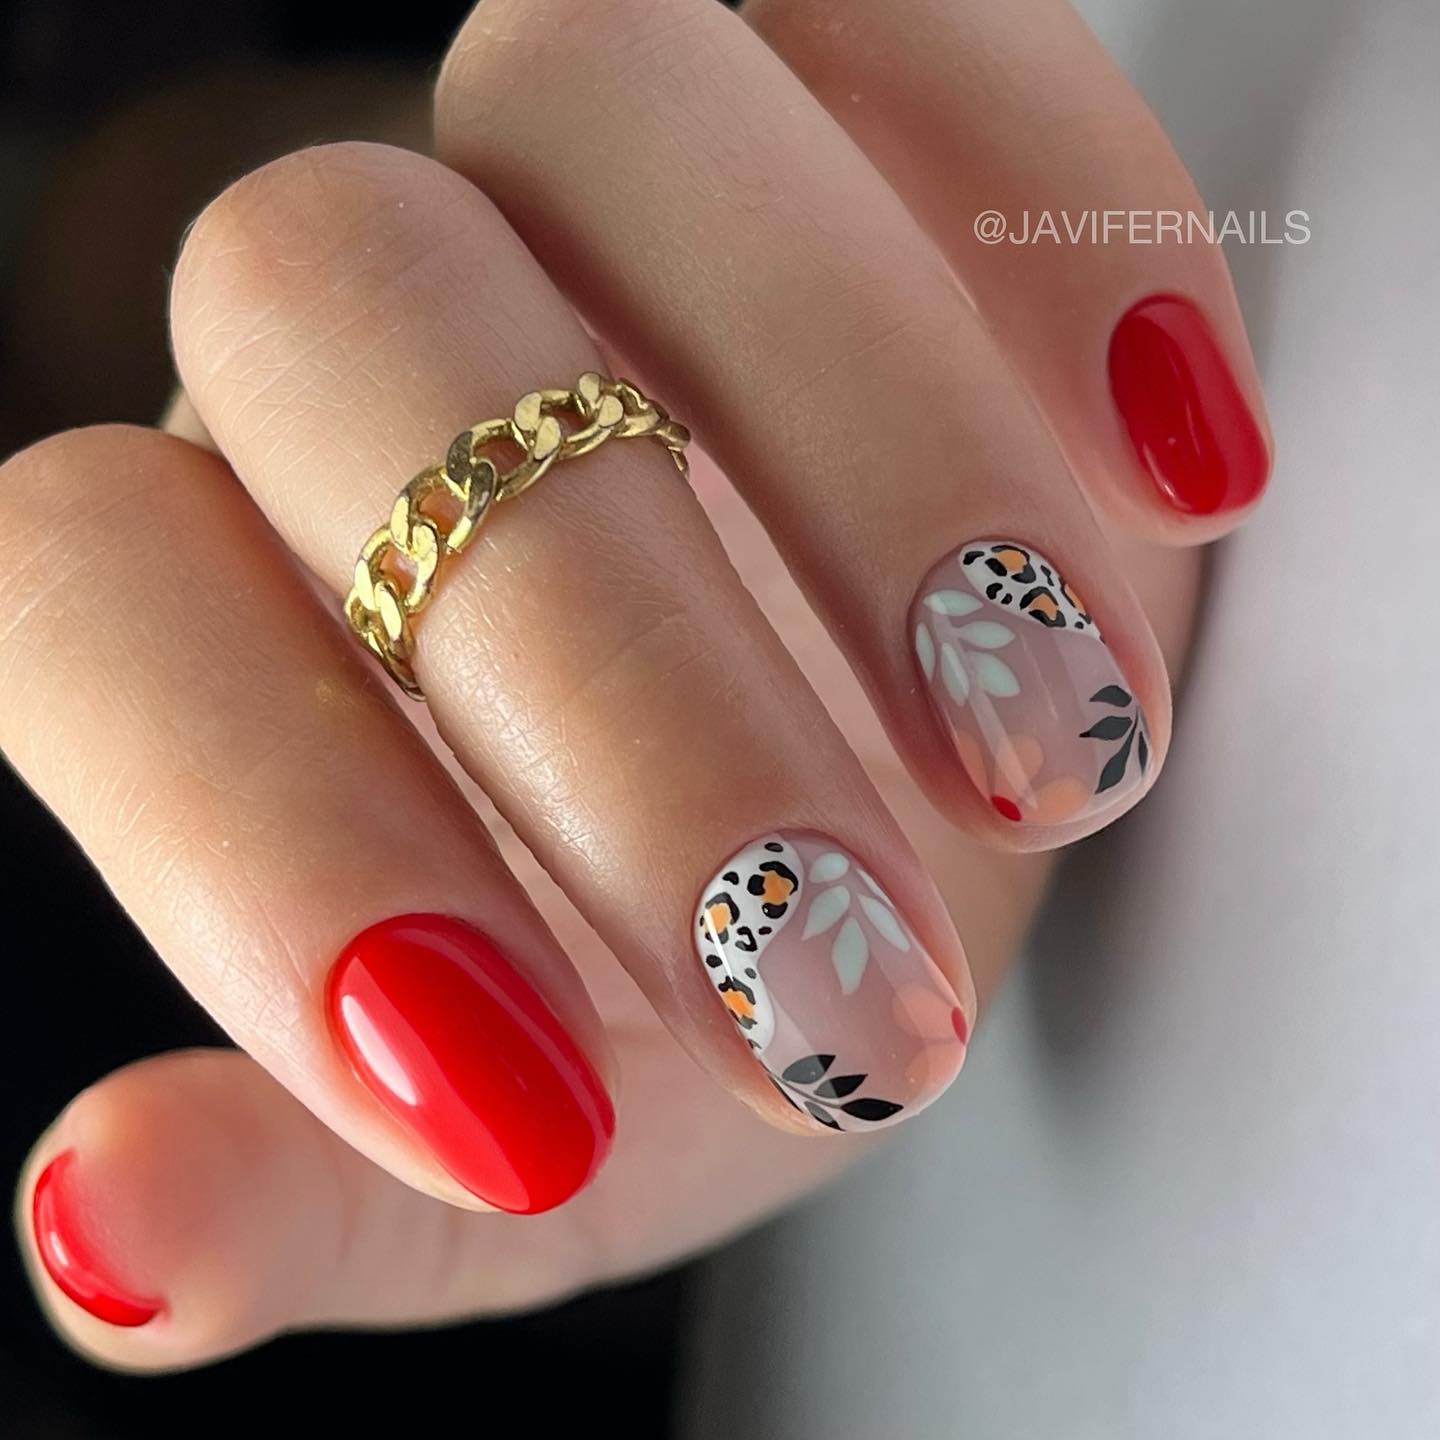 100+ Short Nail Designs You’ll Want To Try This Year images 14